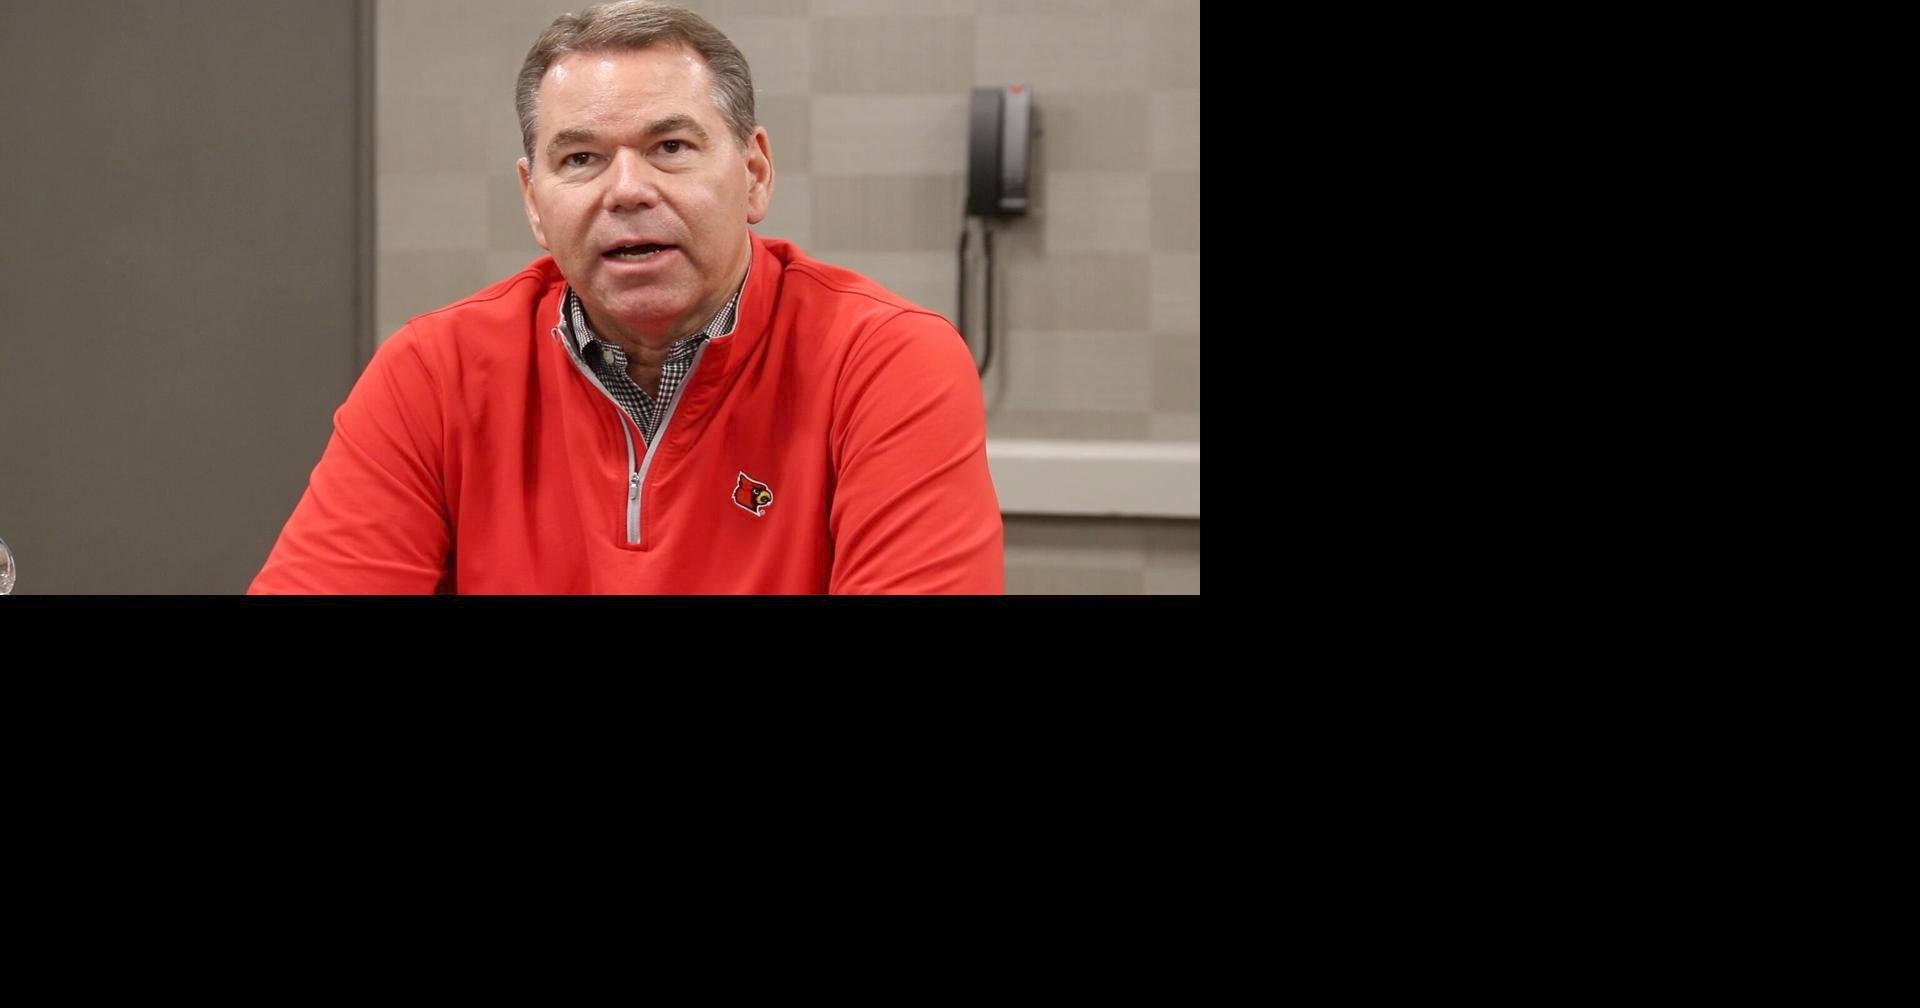 WATCH LIVE @ 5:30 pm: UofL interim AD Vince Tyra's news conference